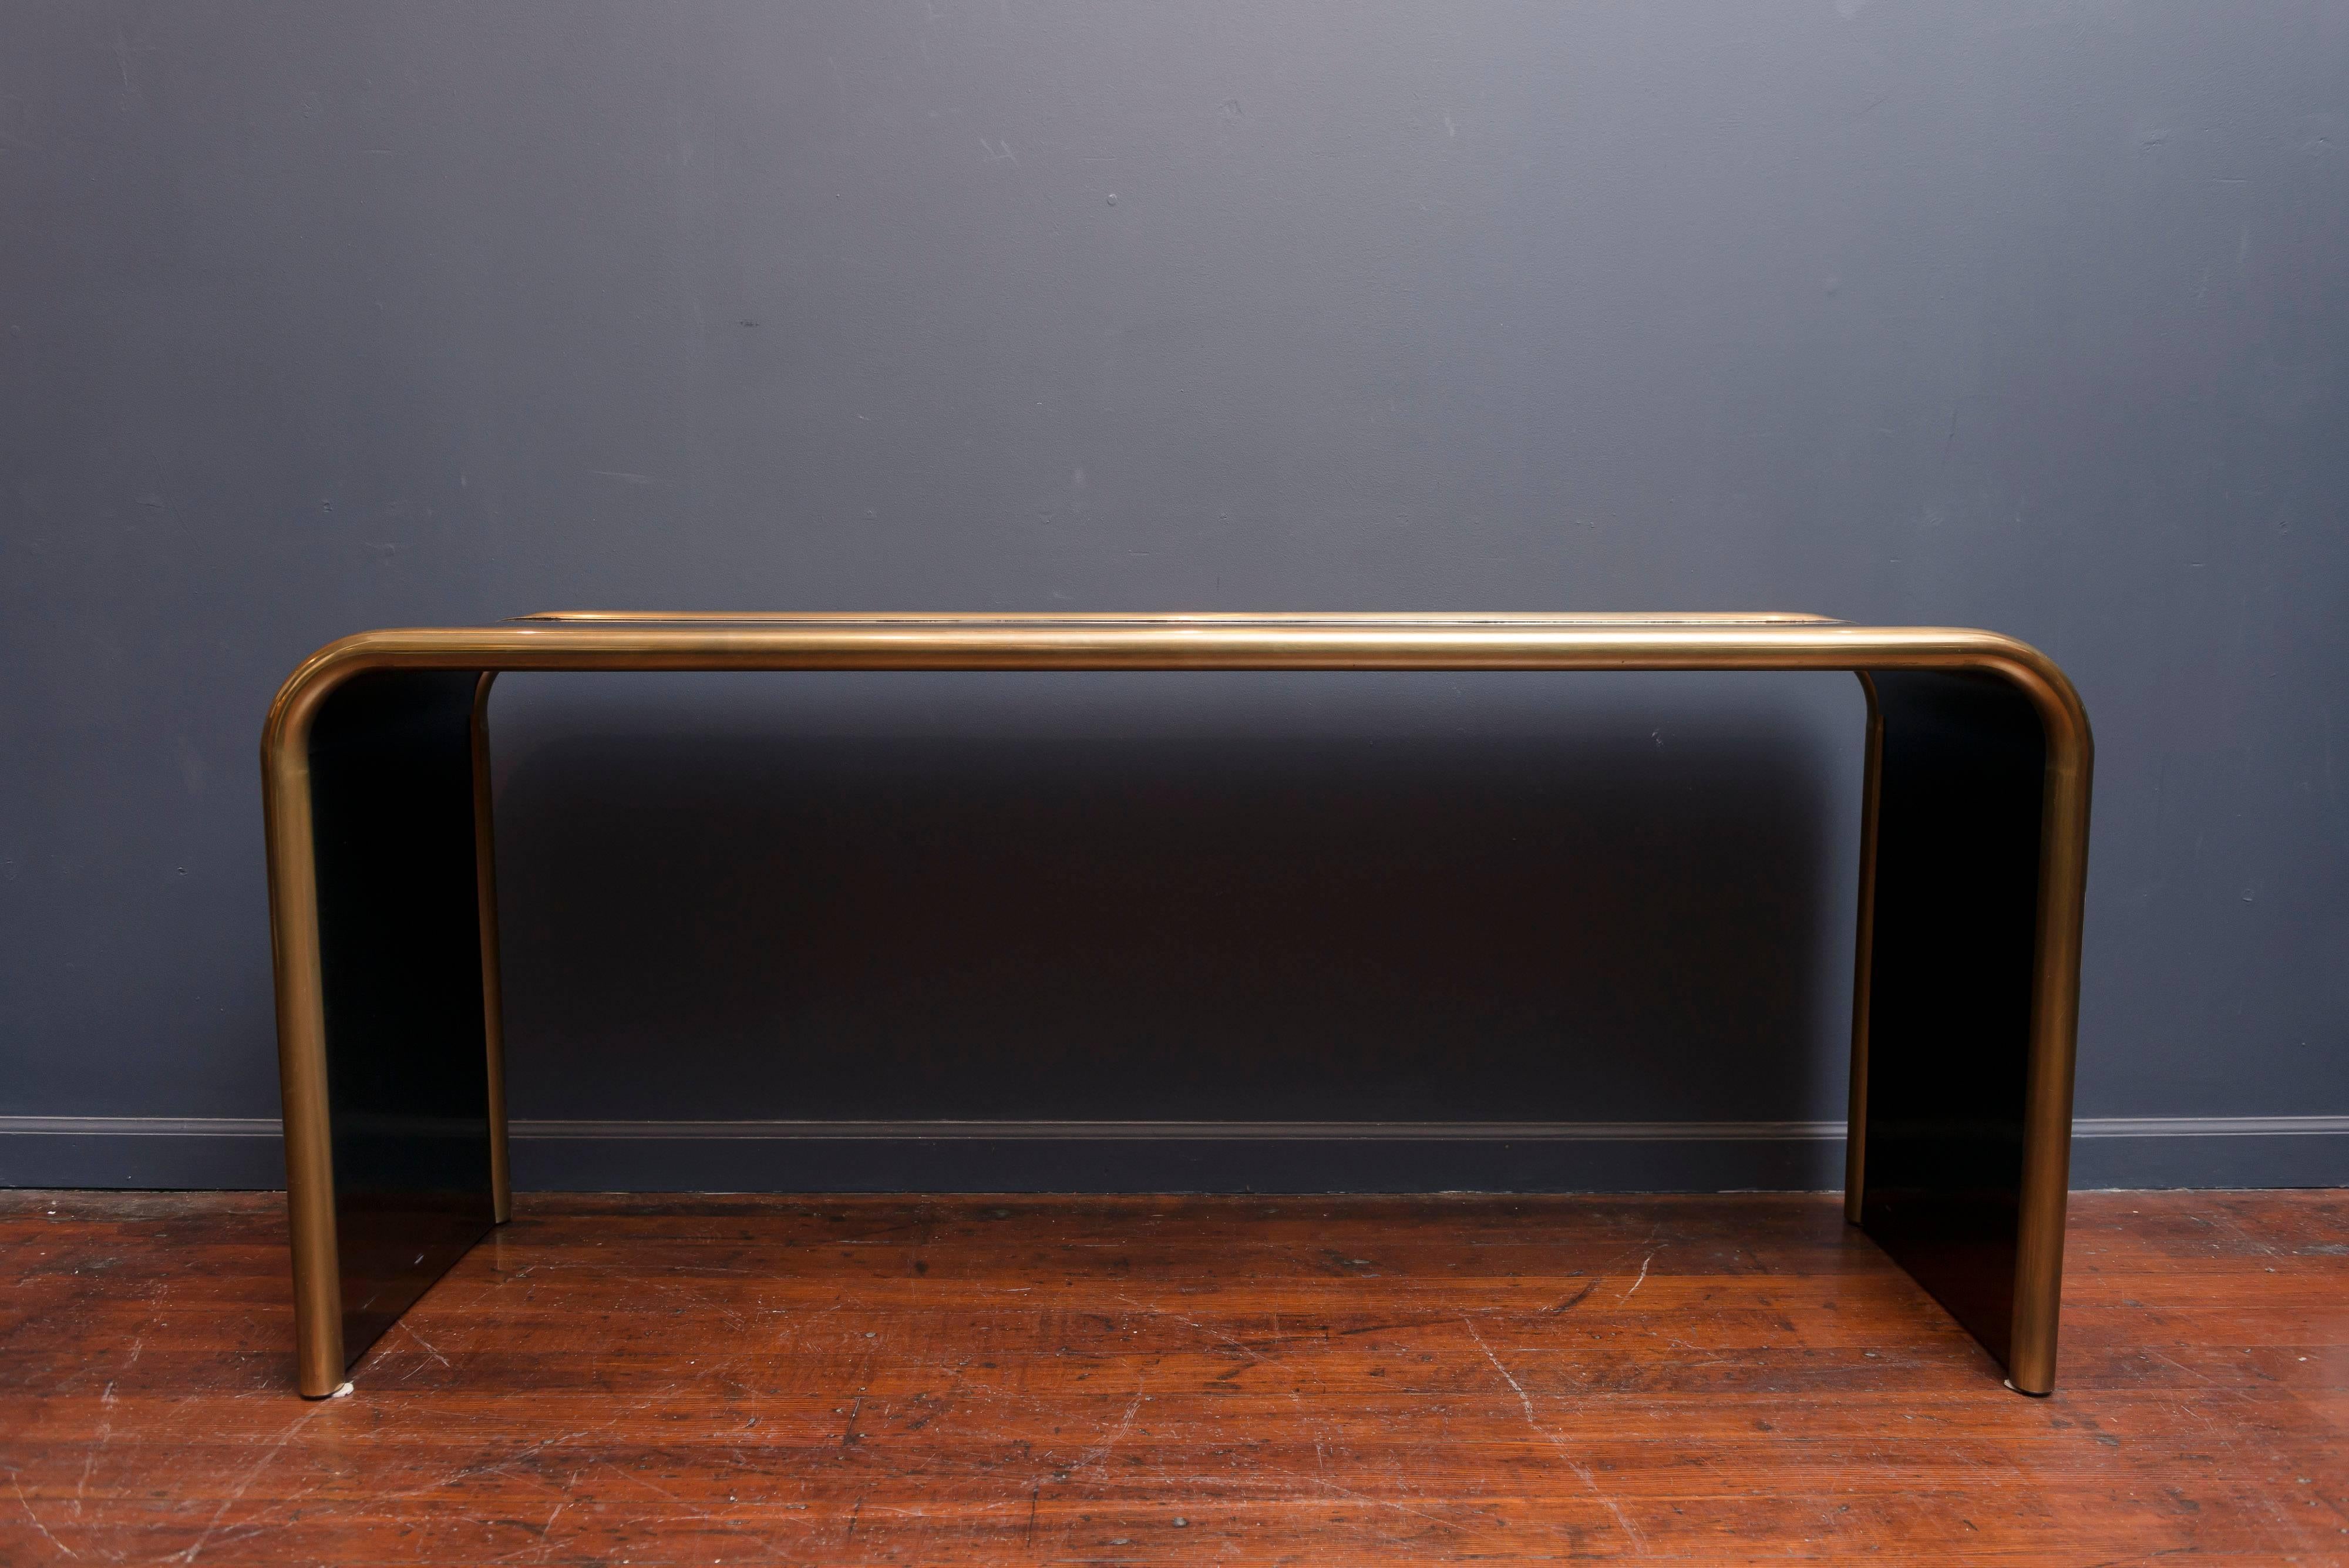 Mastercraft brass and enamel acid etched console table.